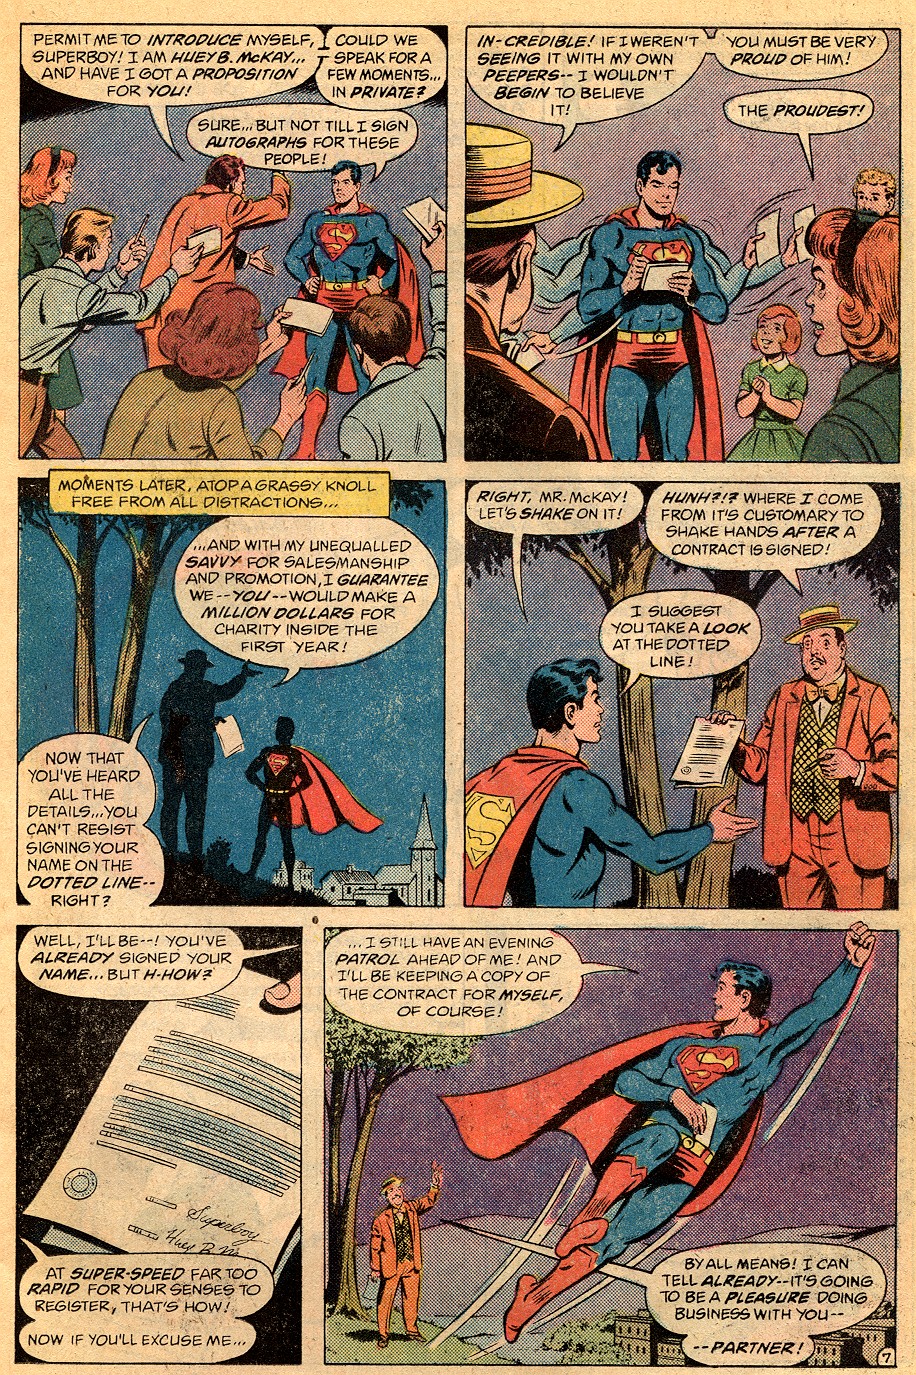 The New Adventures of Superboy 21 Page 10